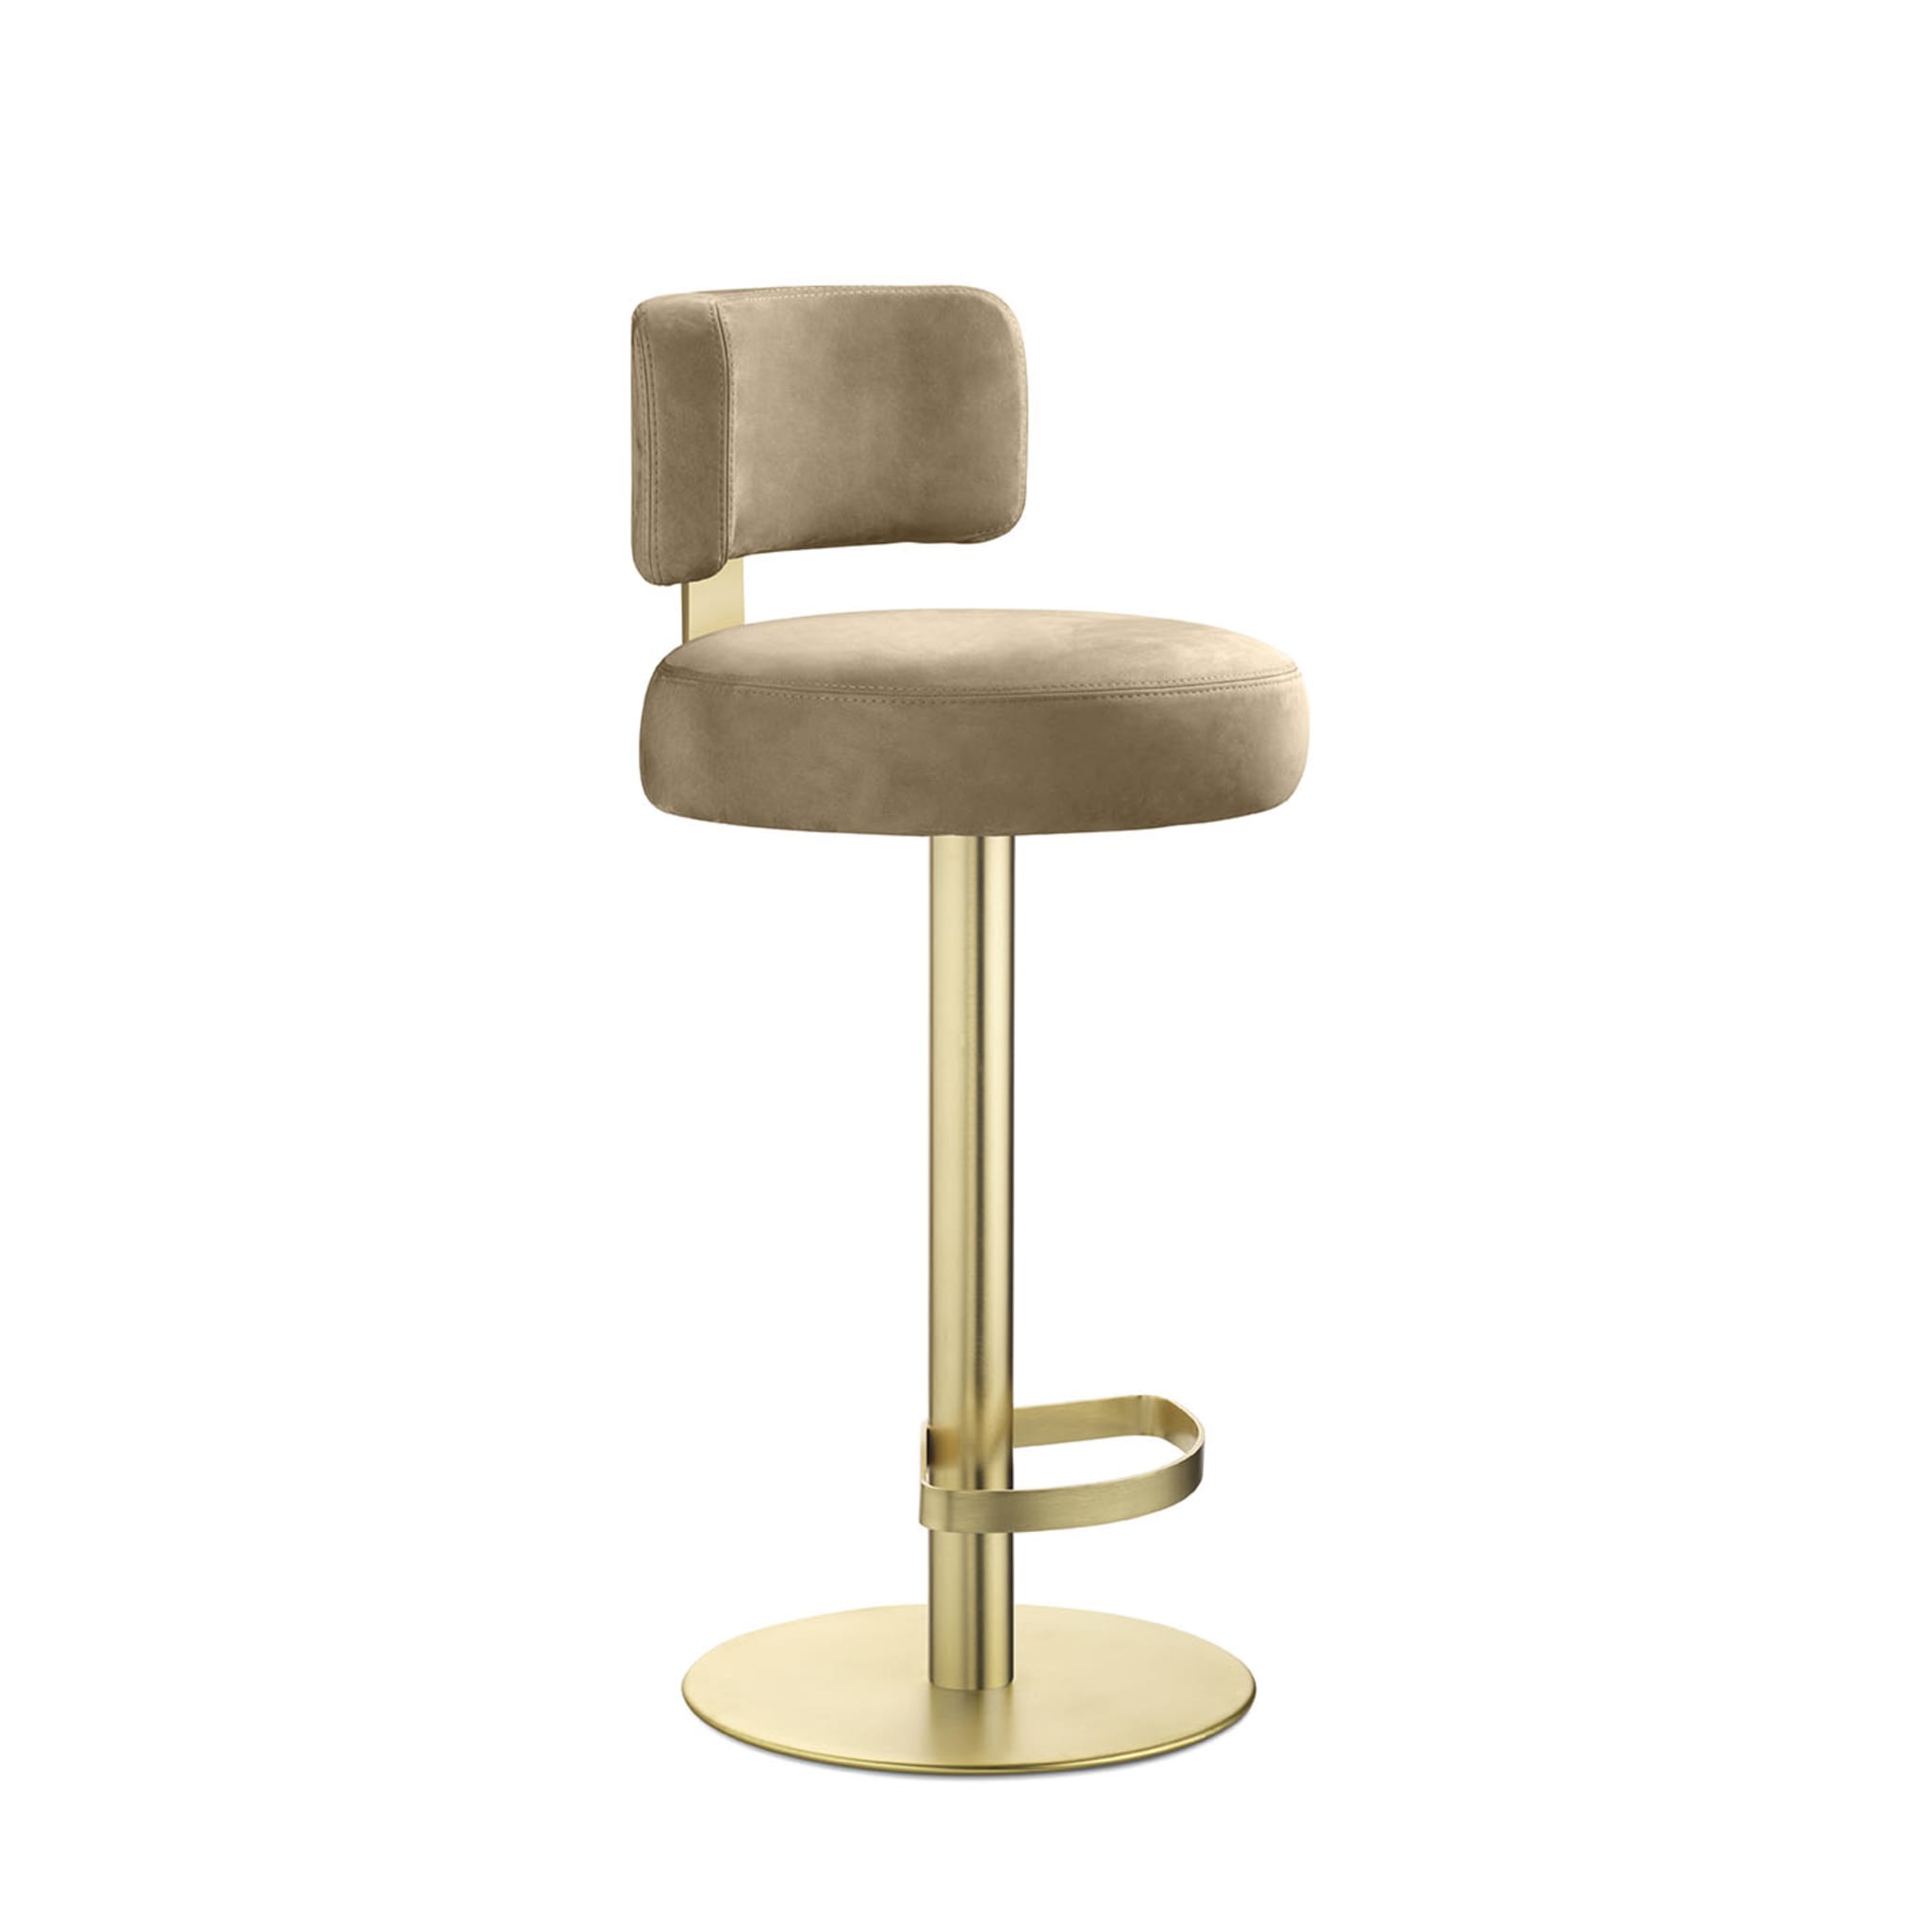 Alfred fixed Gold Bar Stool - Alternative view 1